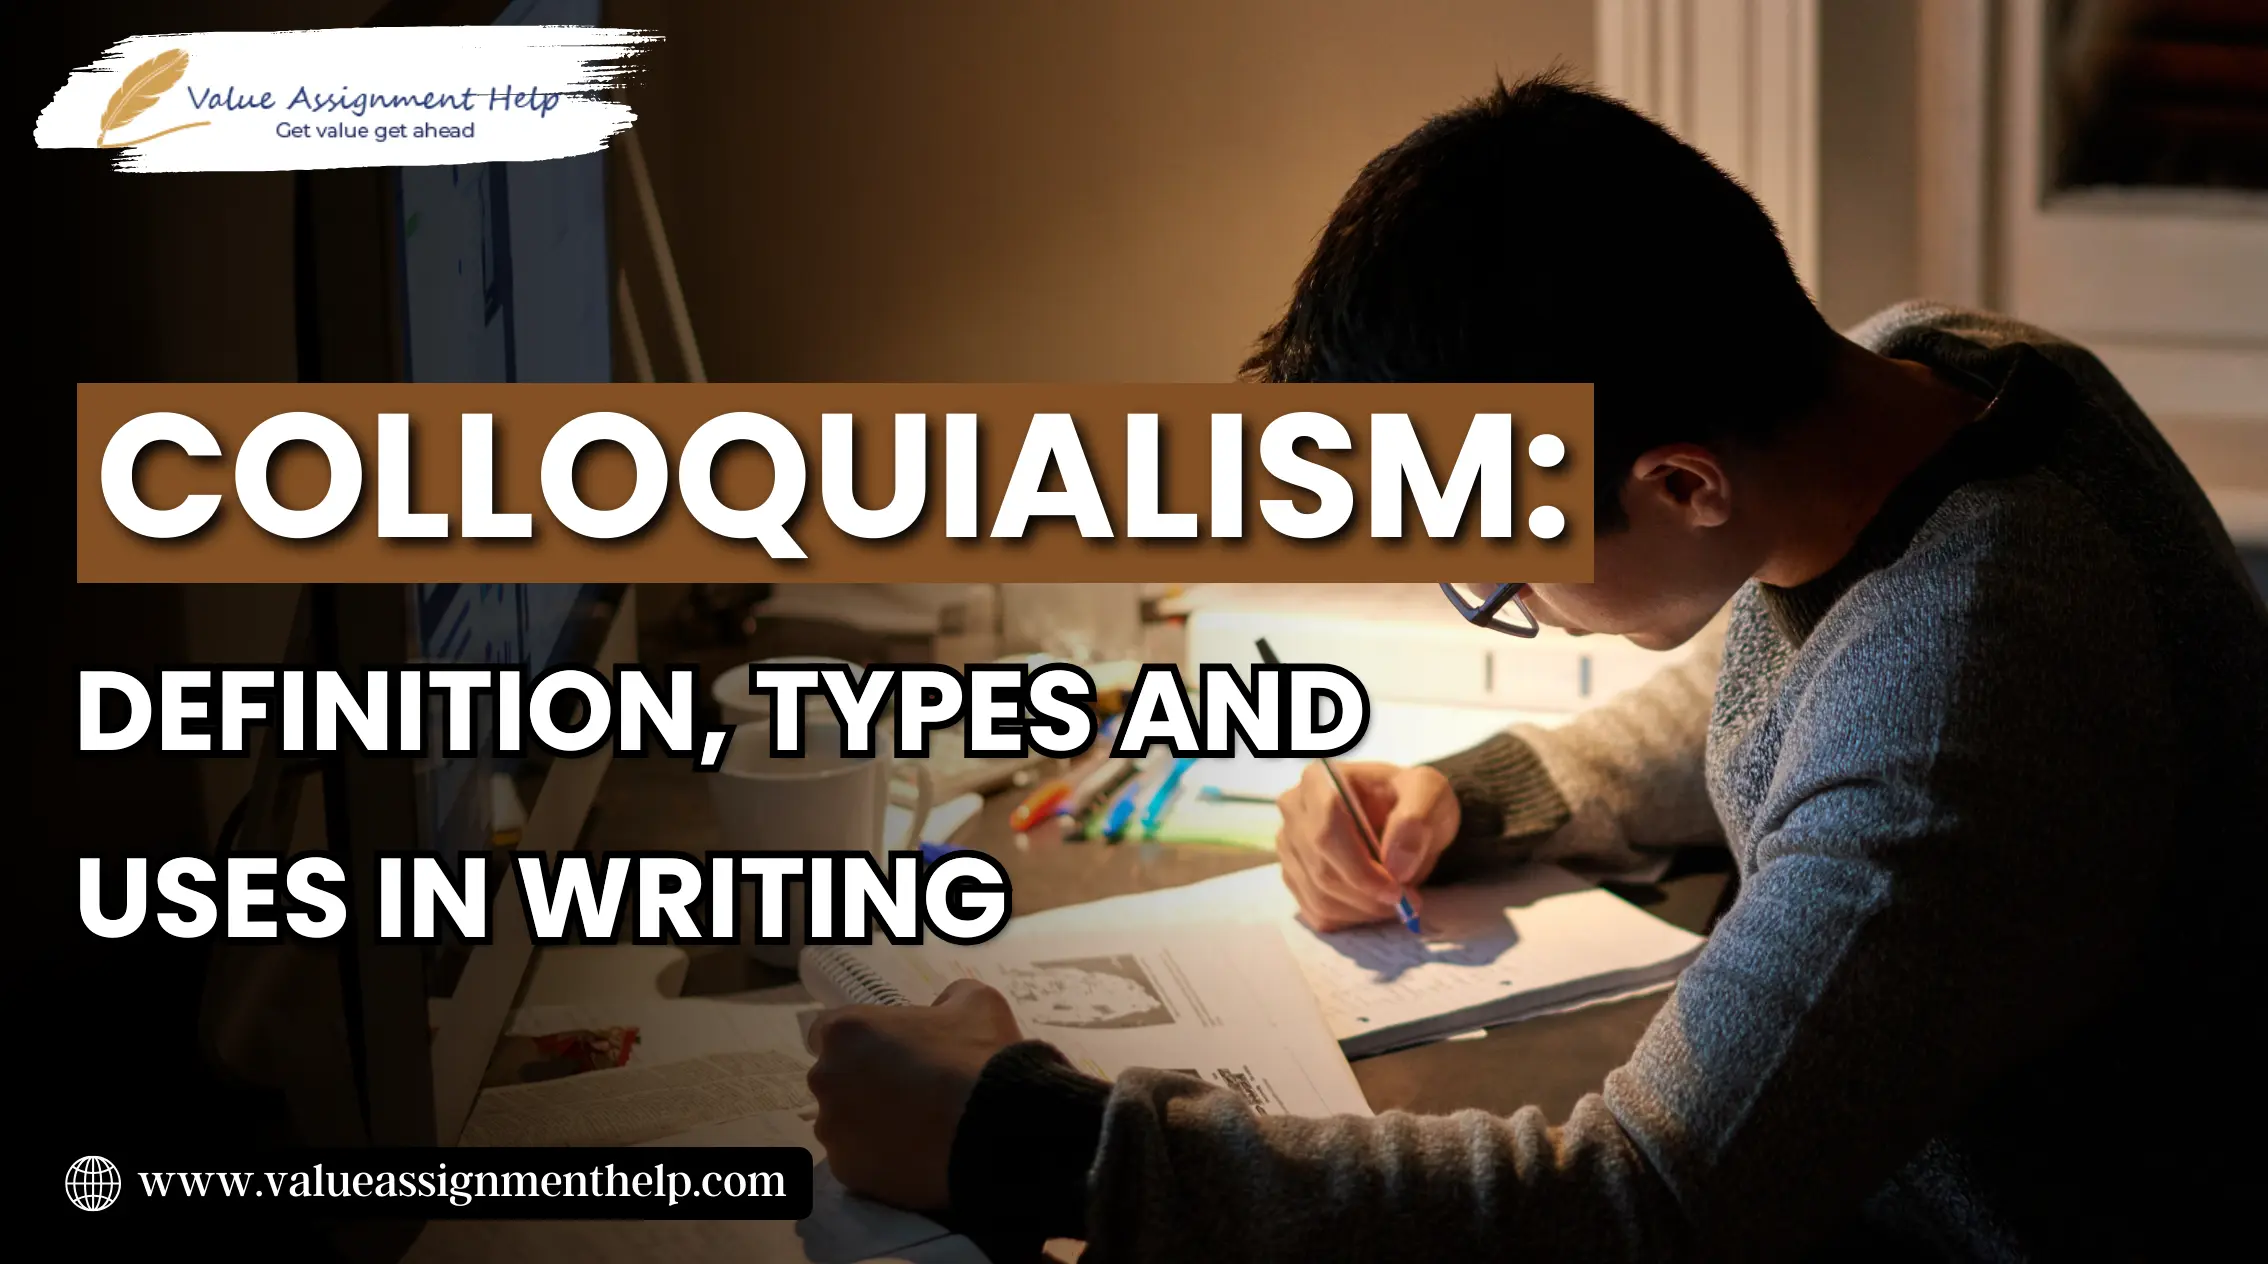  Colloquialism: Definition, Types and Uses In Writing